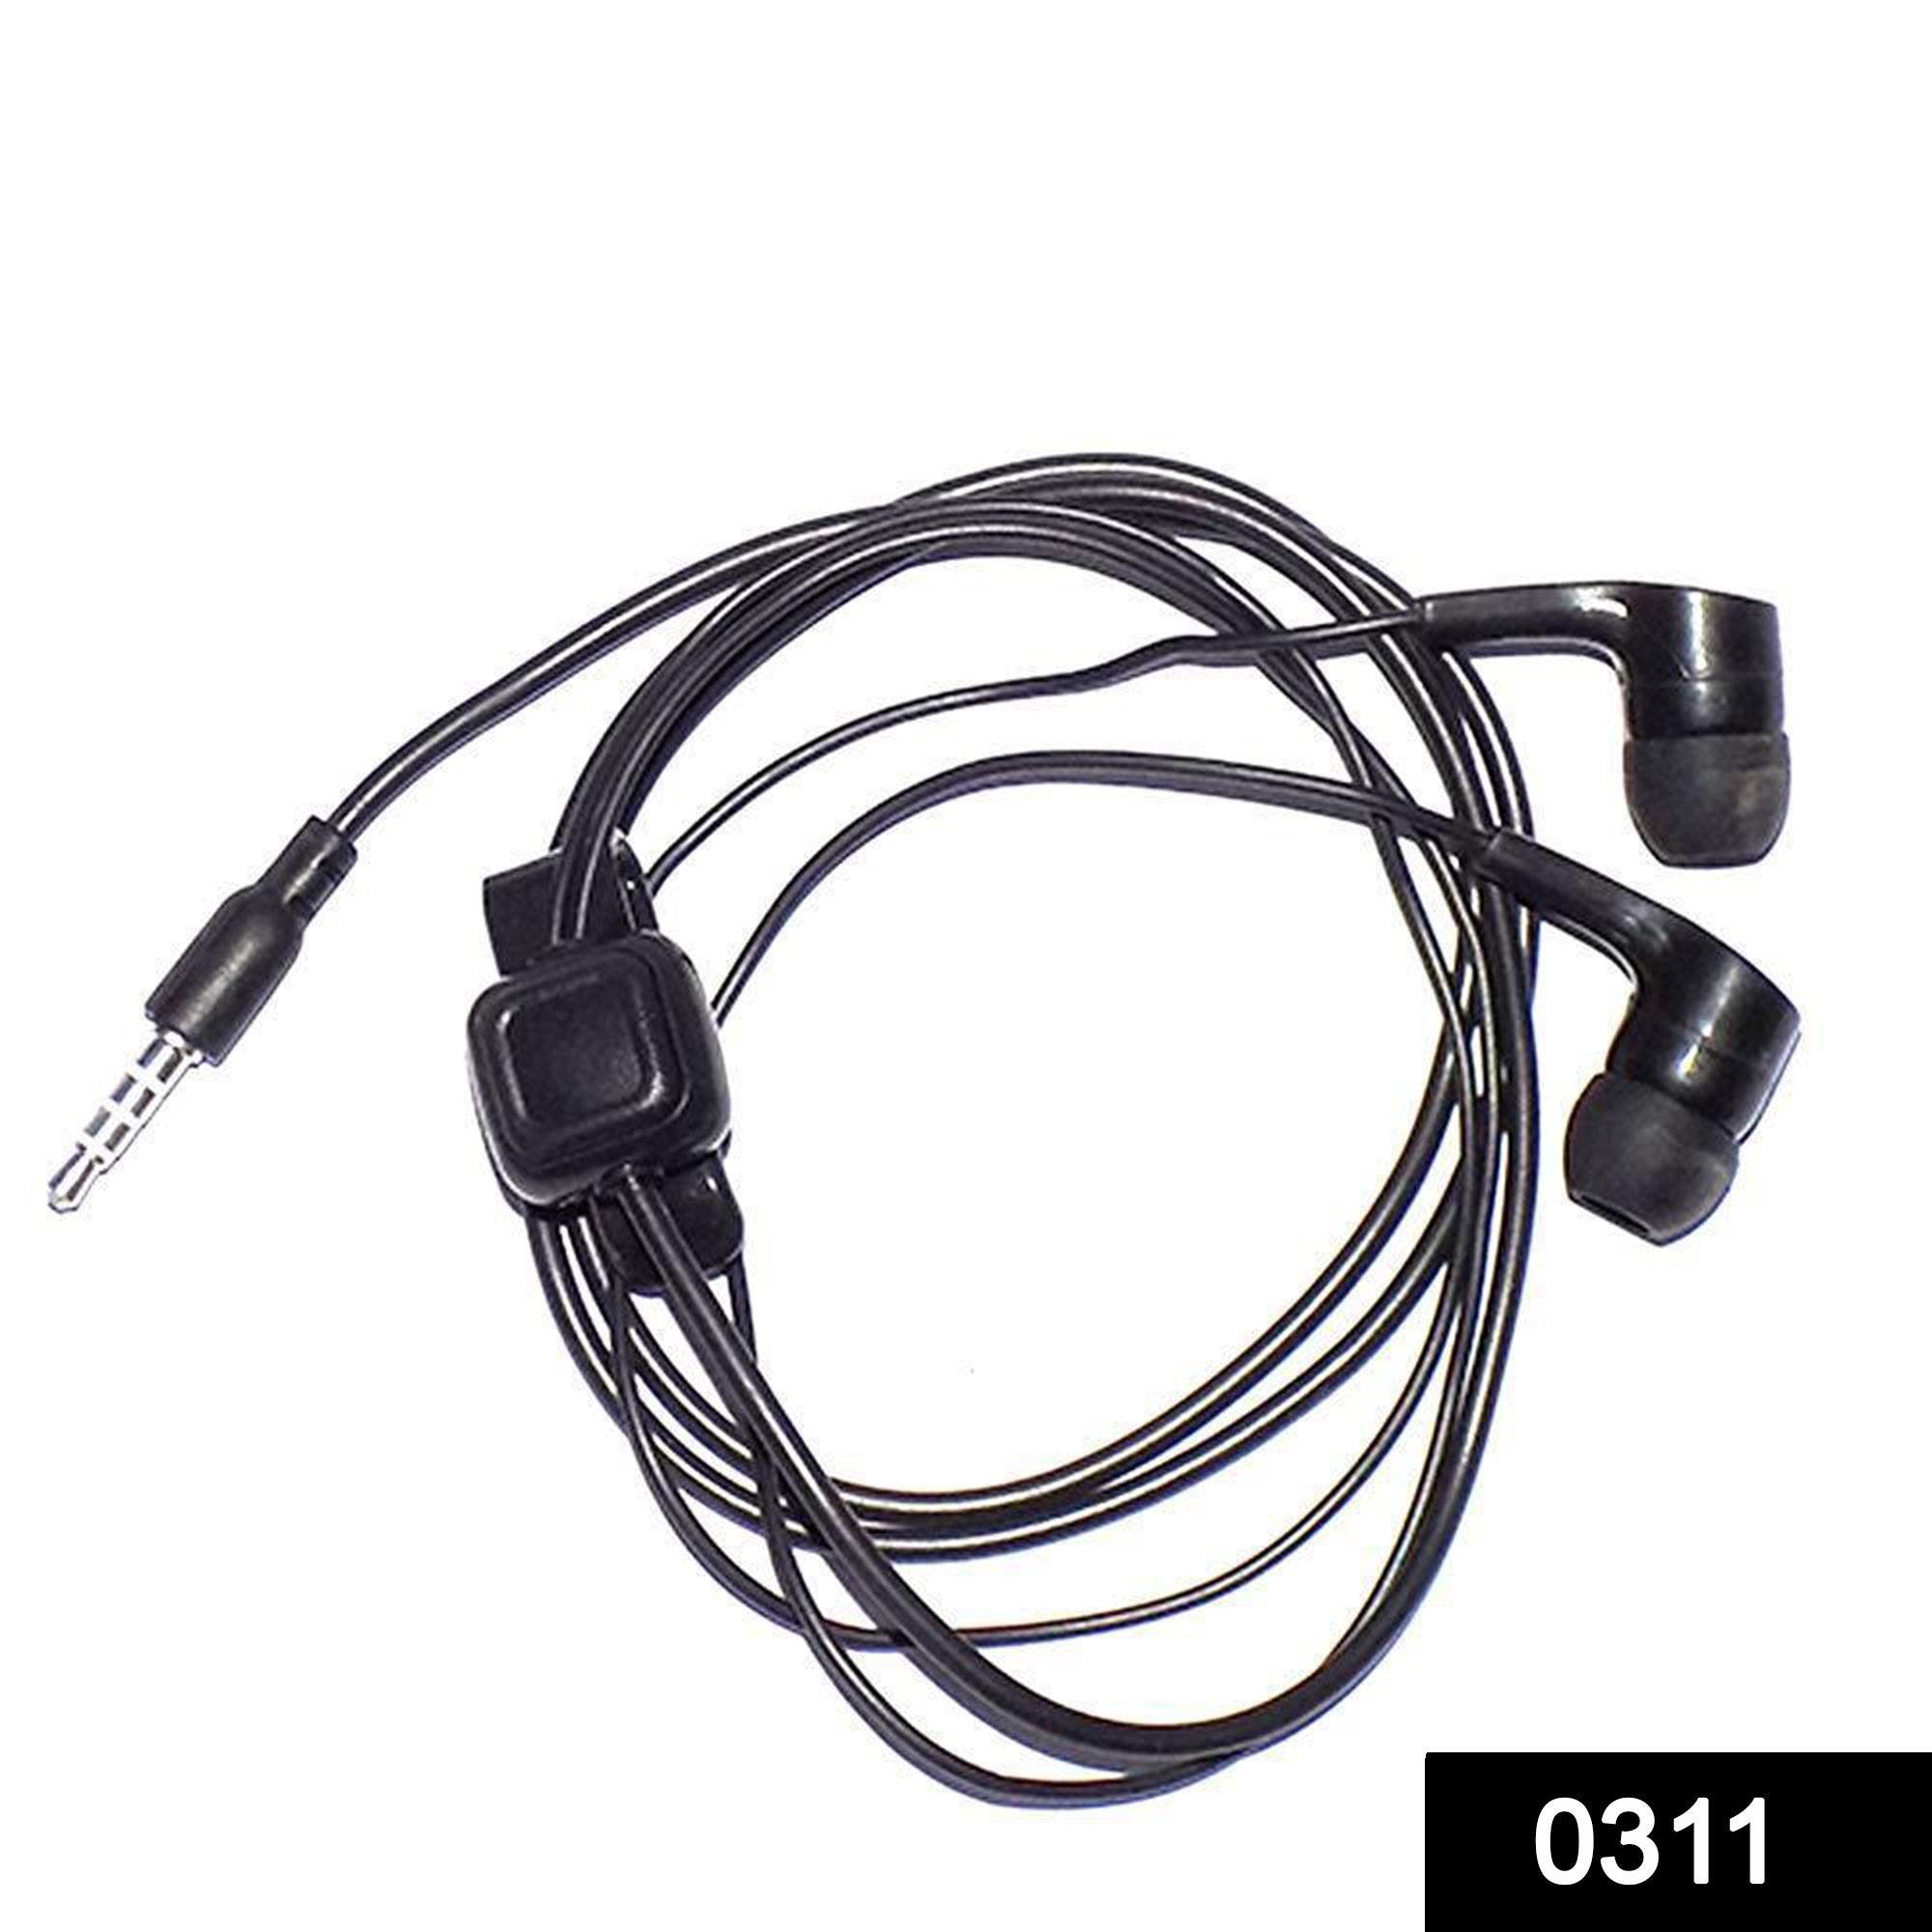 311 headphone stereo headphones with hands free control